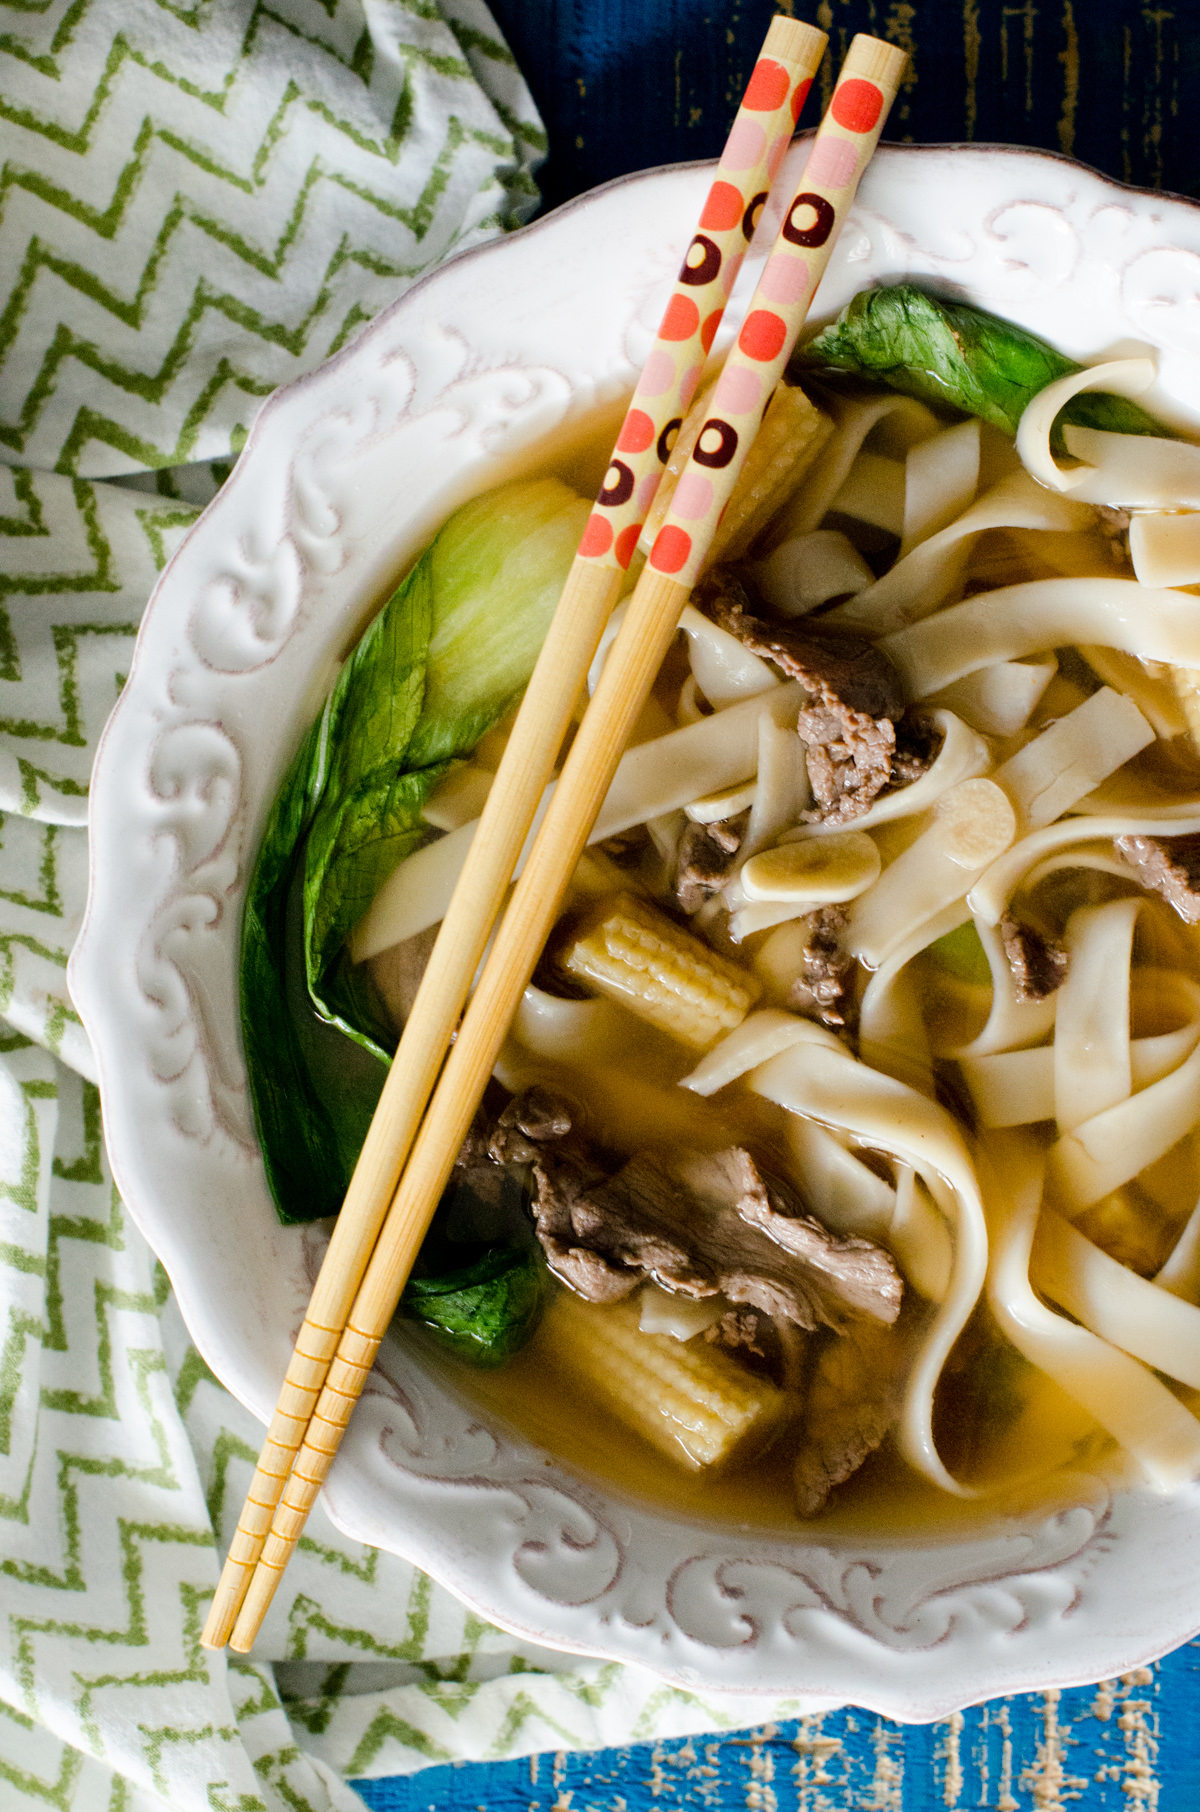 Chinese 5 Spice Beef and Noodles recipe by ChefSarahElizabeth.com